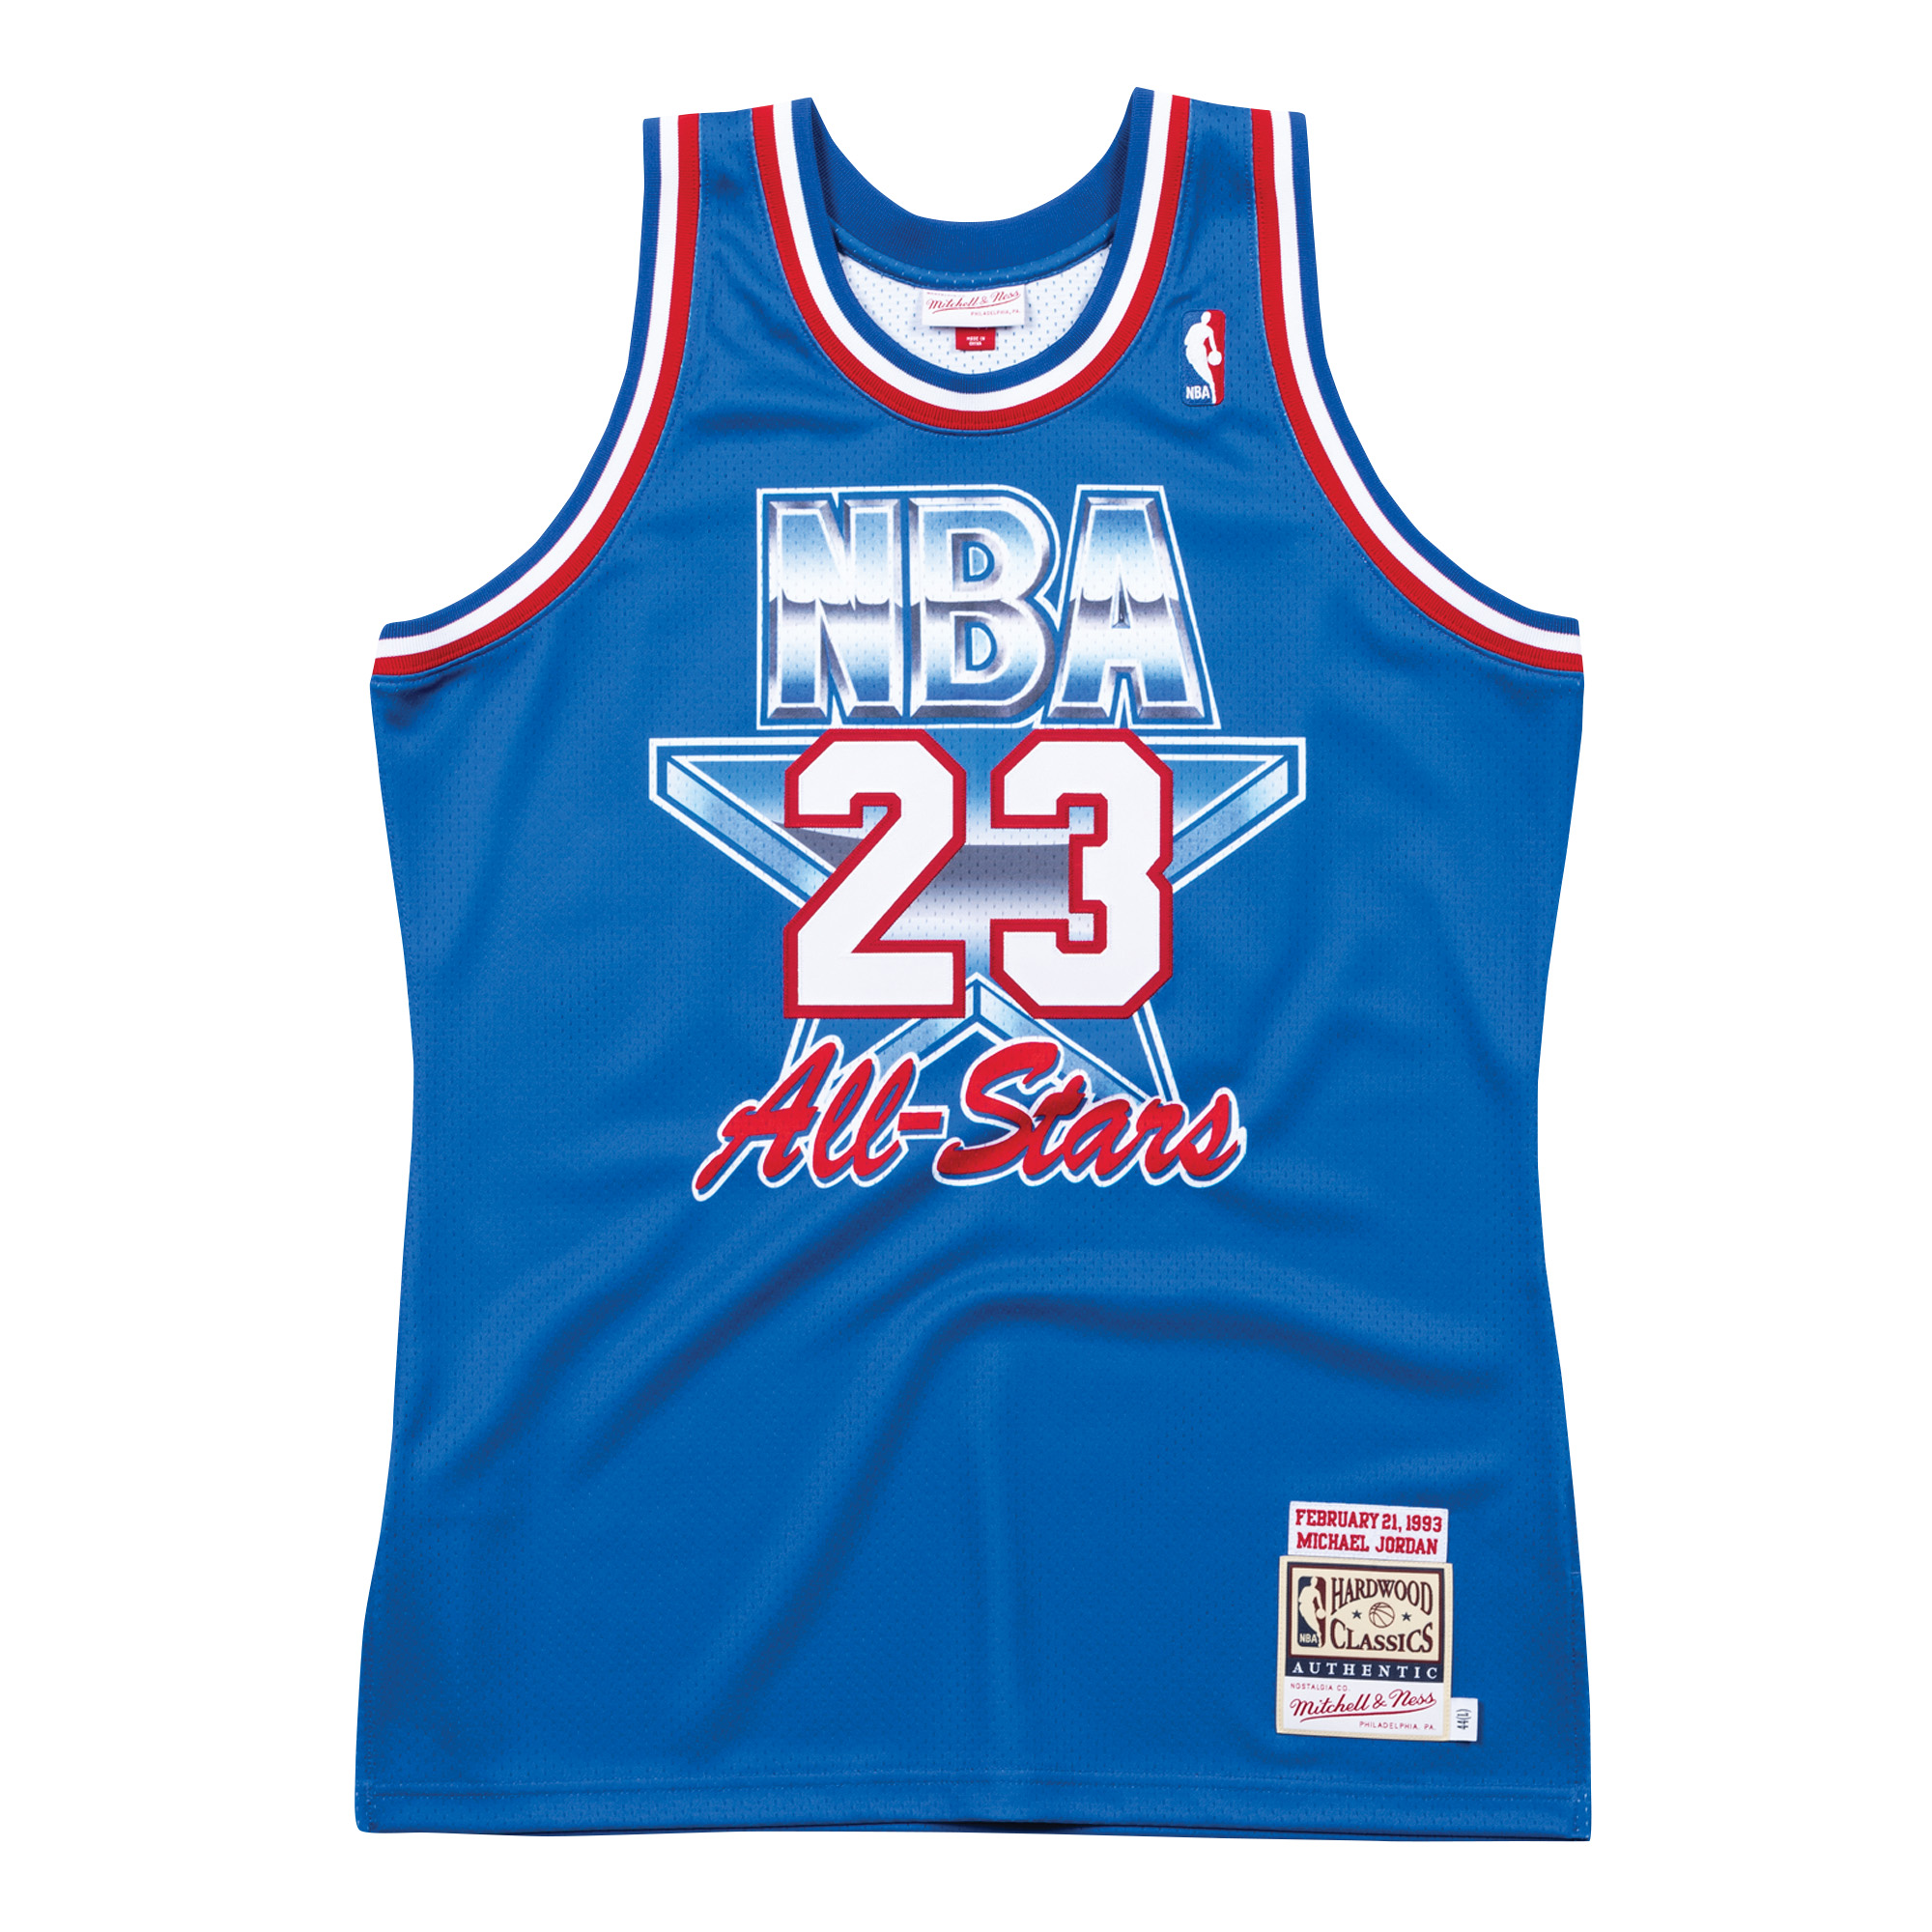 NBA jerseys: Ranking the 30 greatest in history - Sports Illustrated